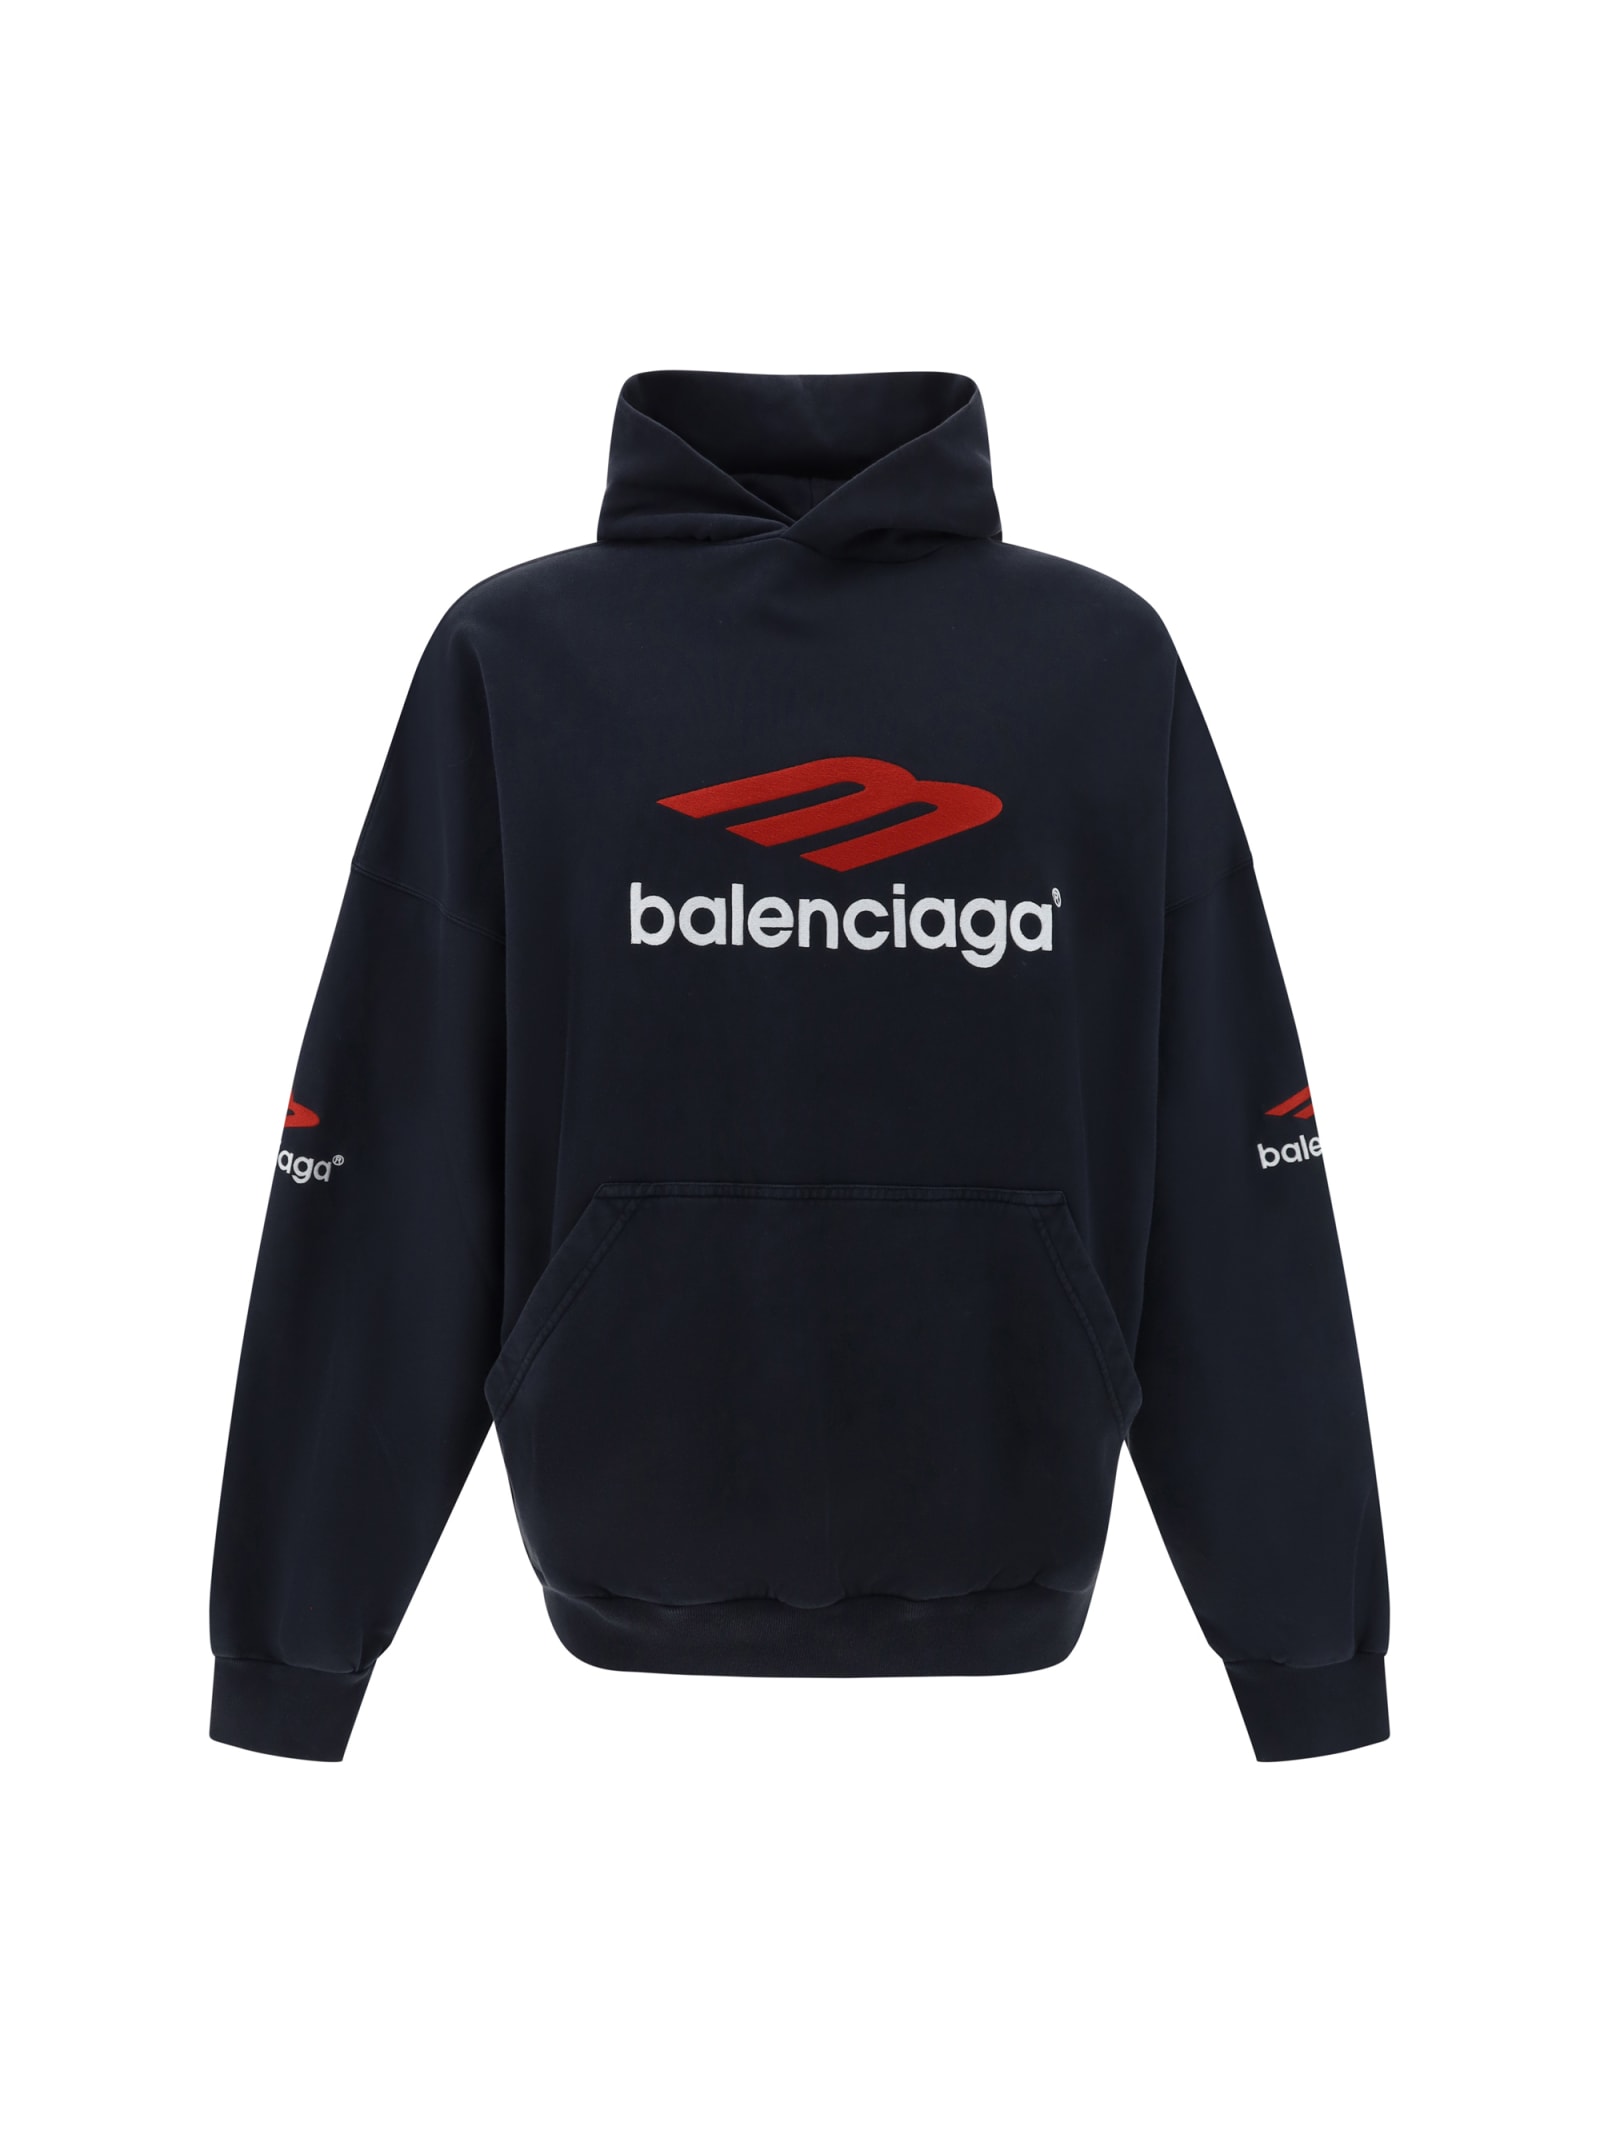 3b Icon Embroidered Hoodie